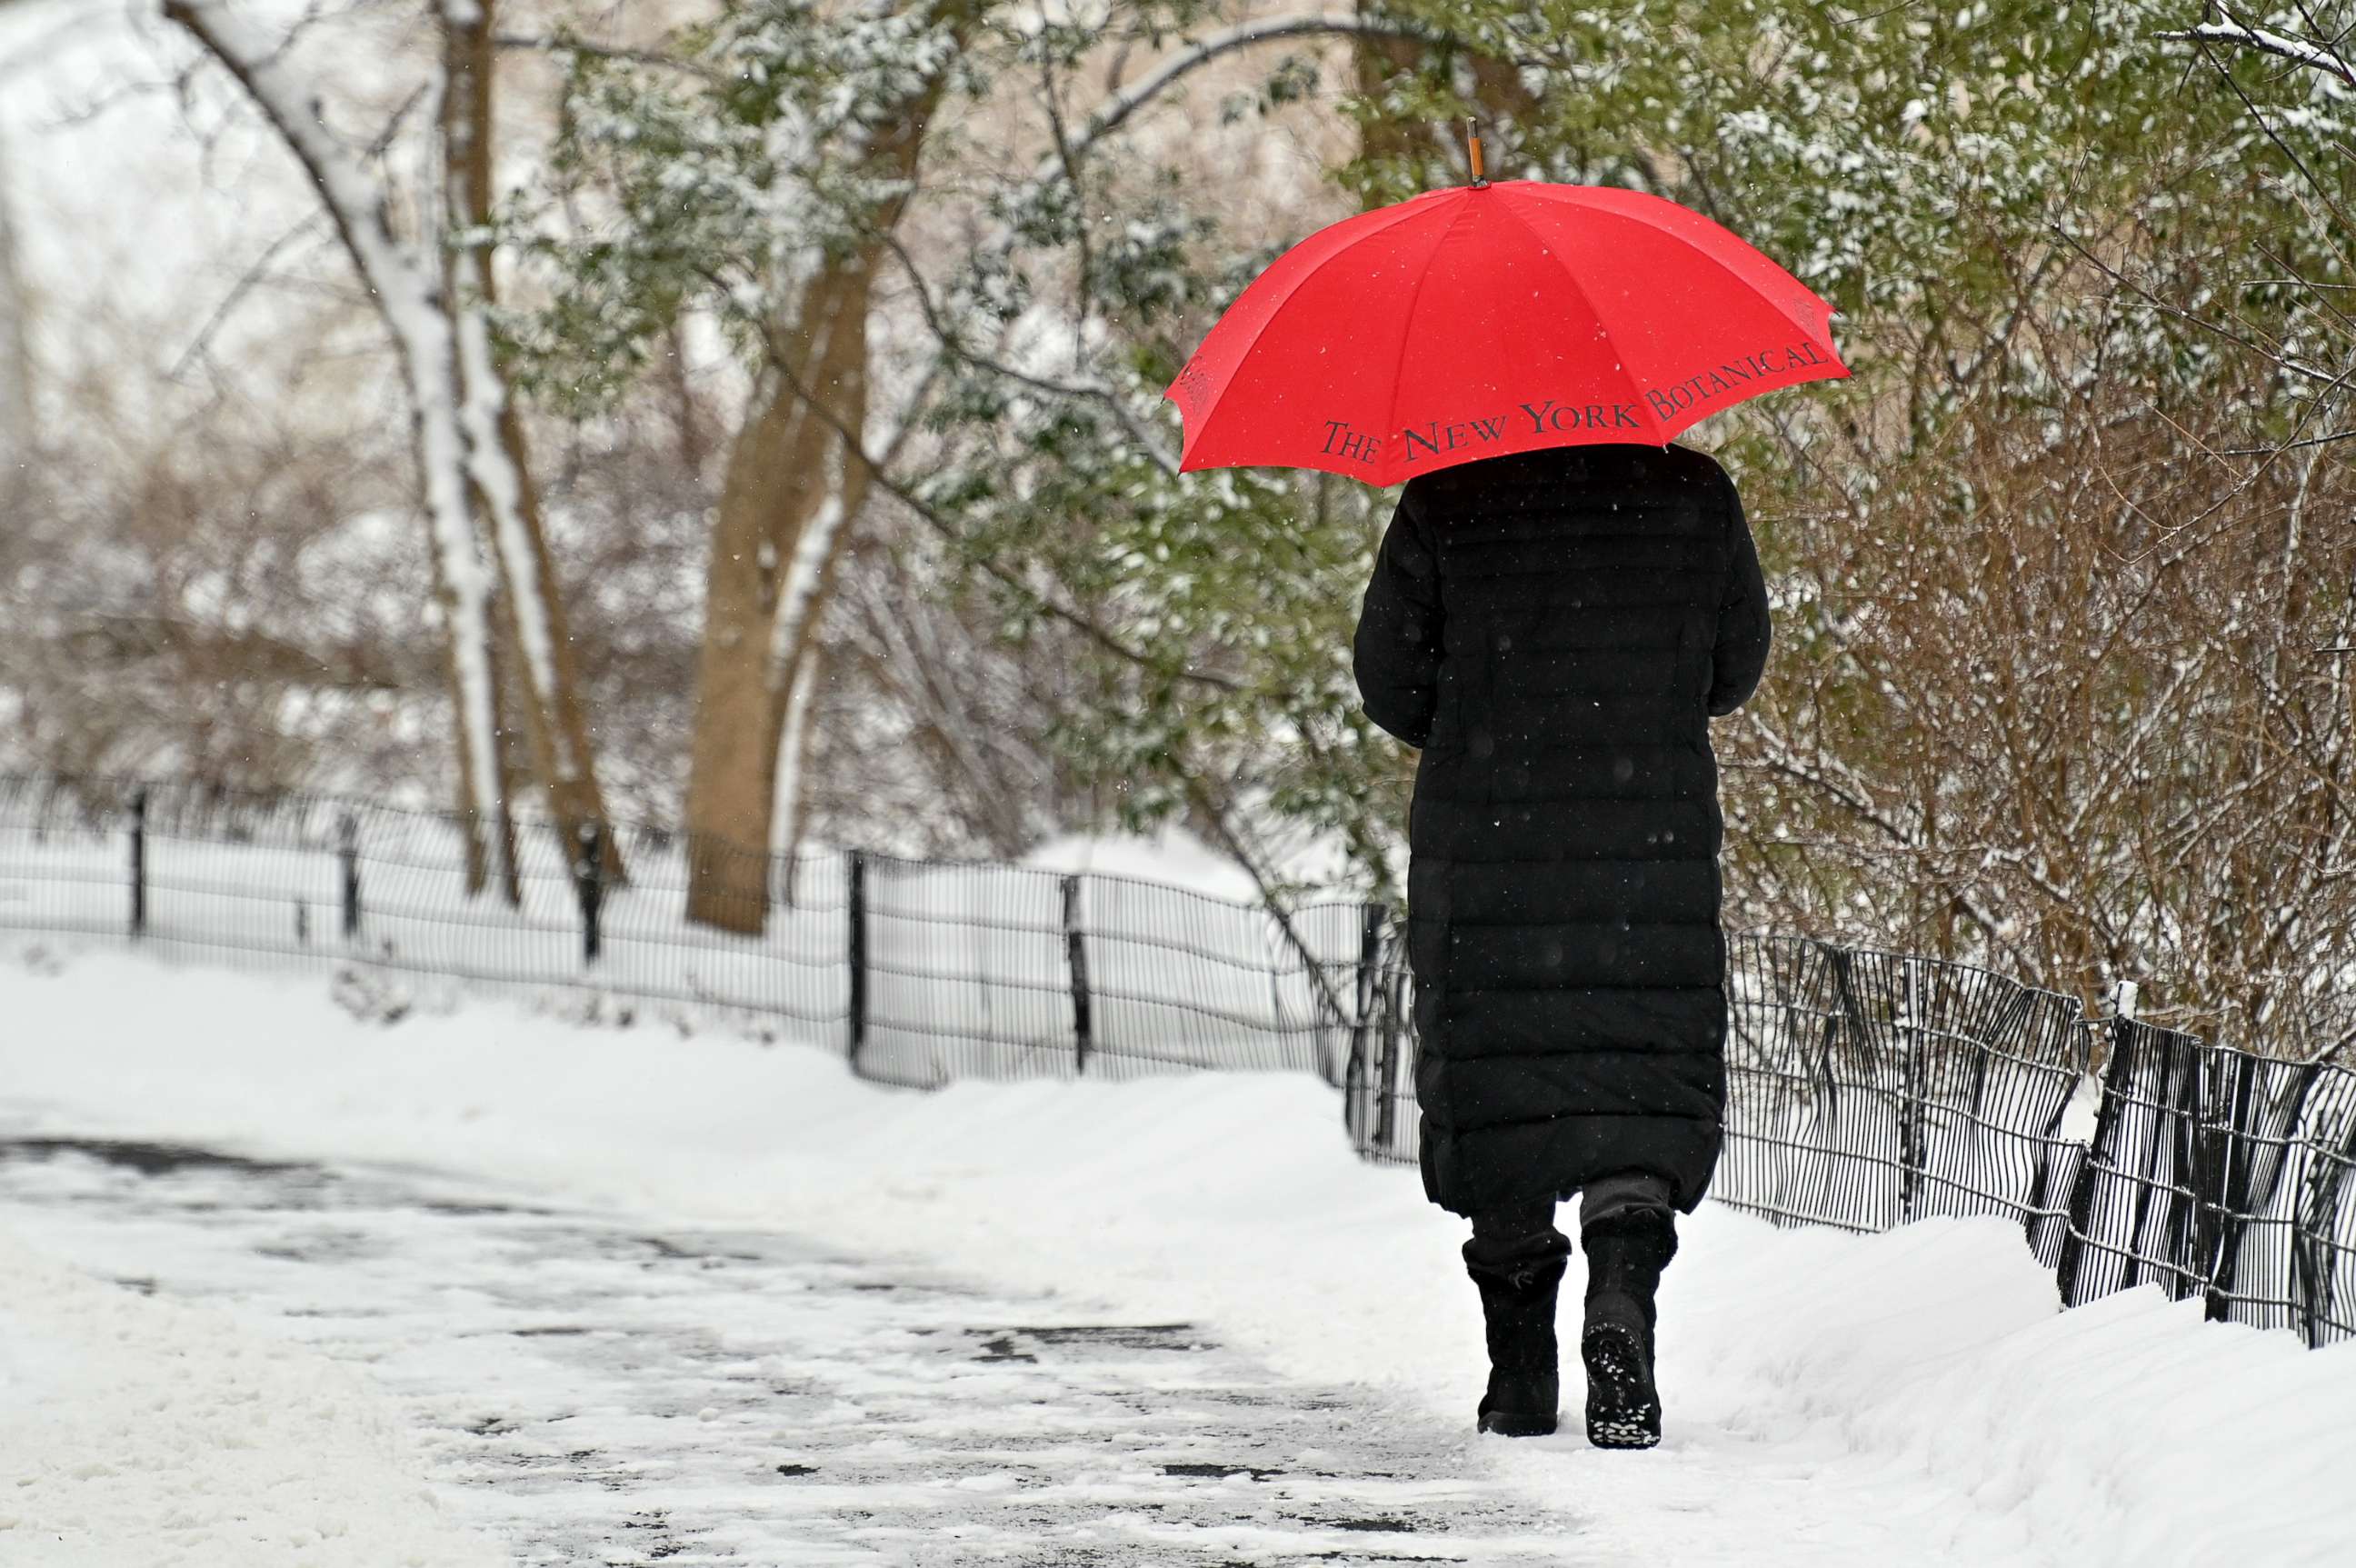 PHOTO: A person holding a red umbrella walks down a snowy path during a snowstorm in Central Park on Feb. 19, 2021 in New York City.